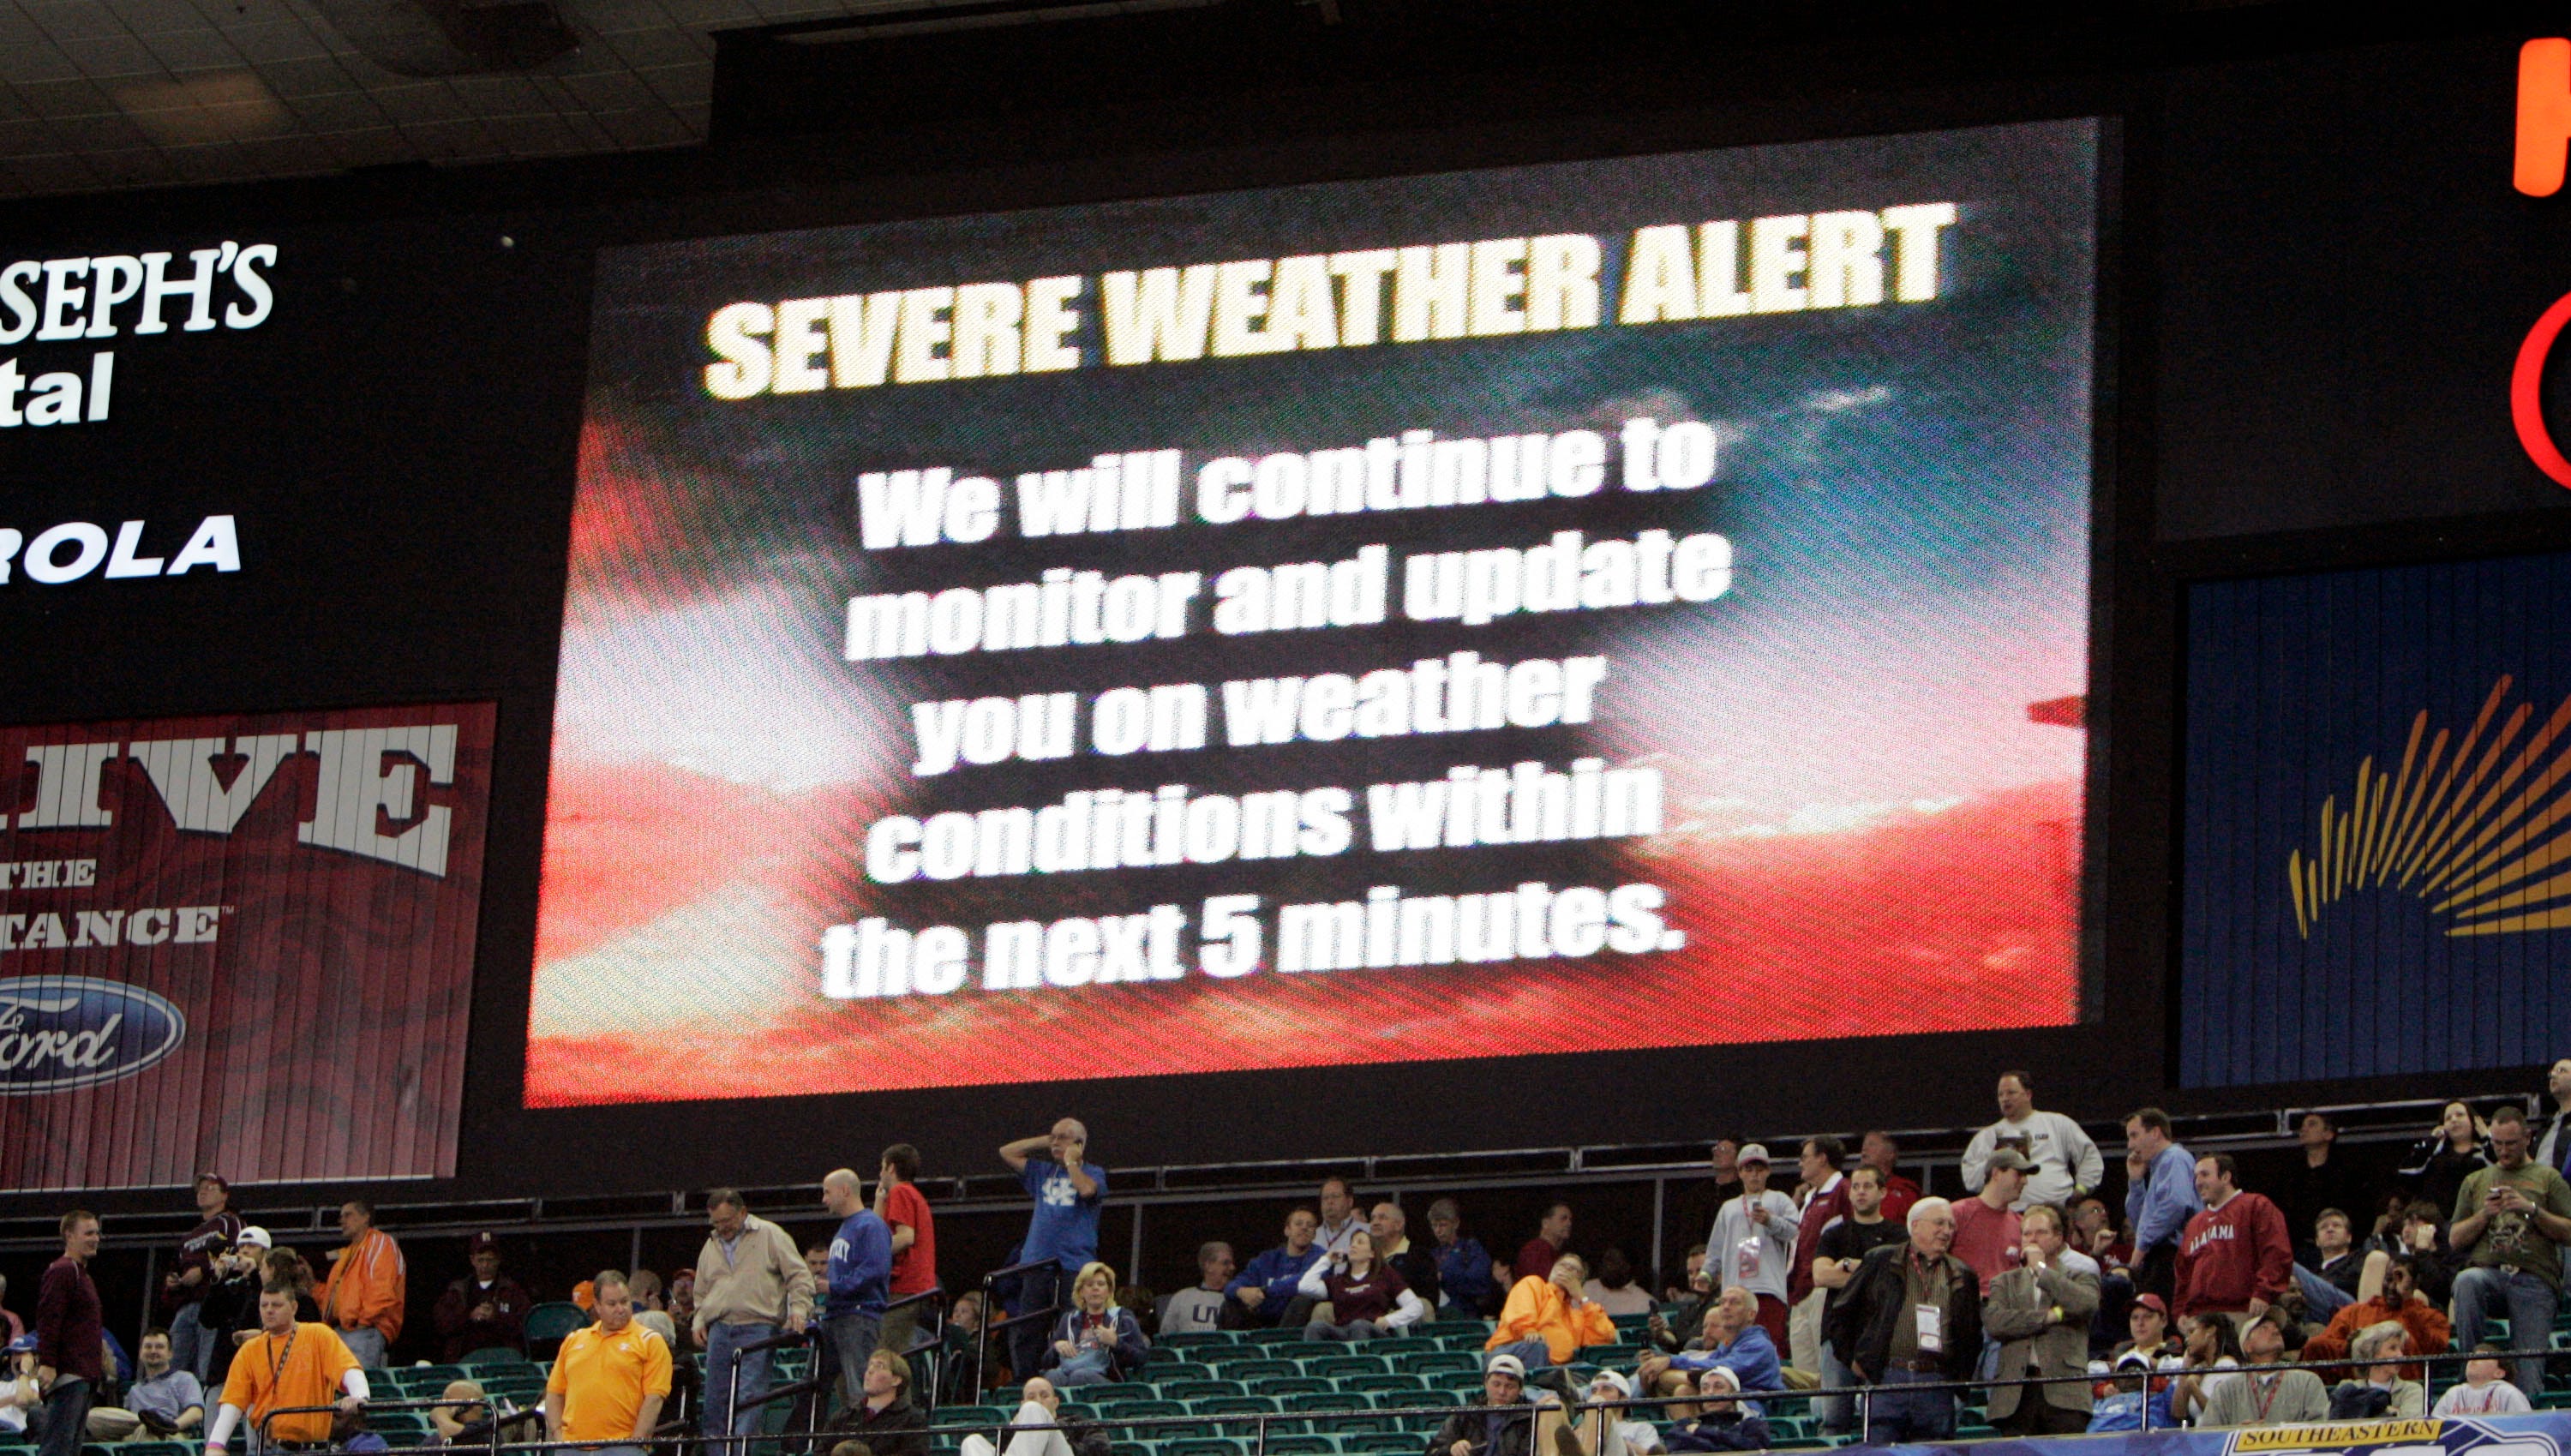 A weather warning is displayed on a television screen hanging near the basketball court.